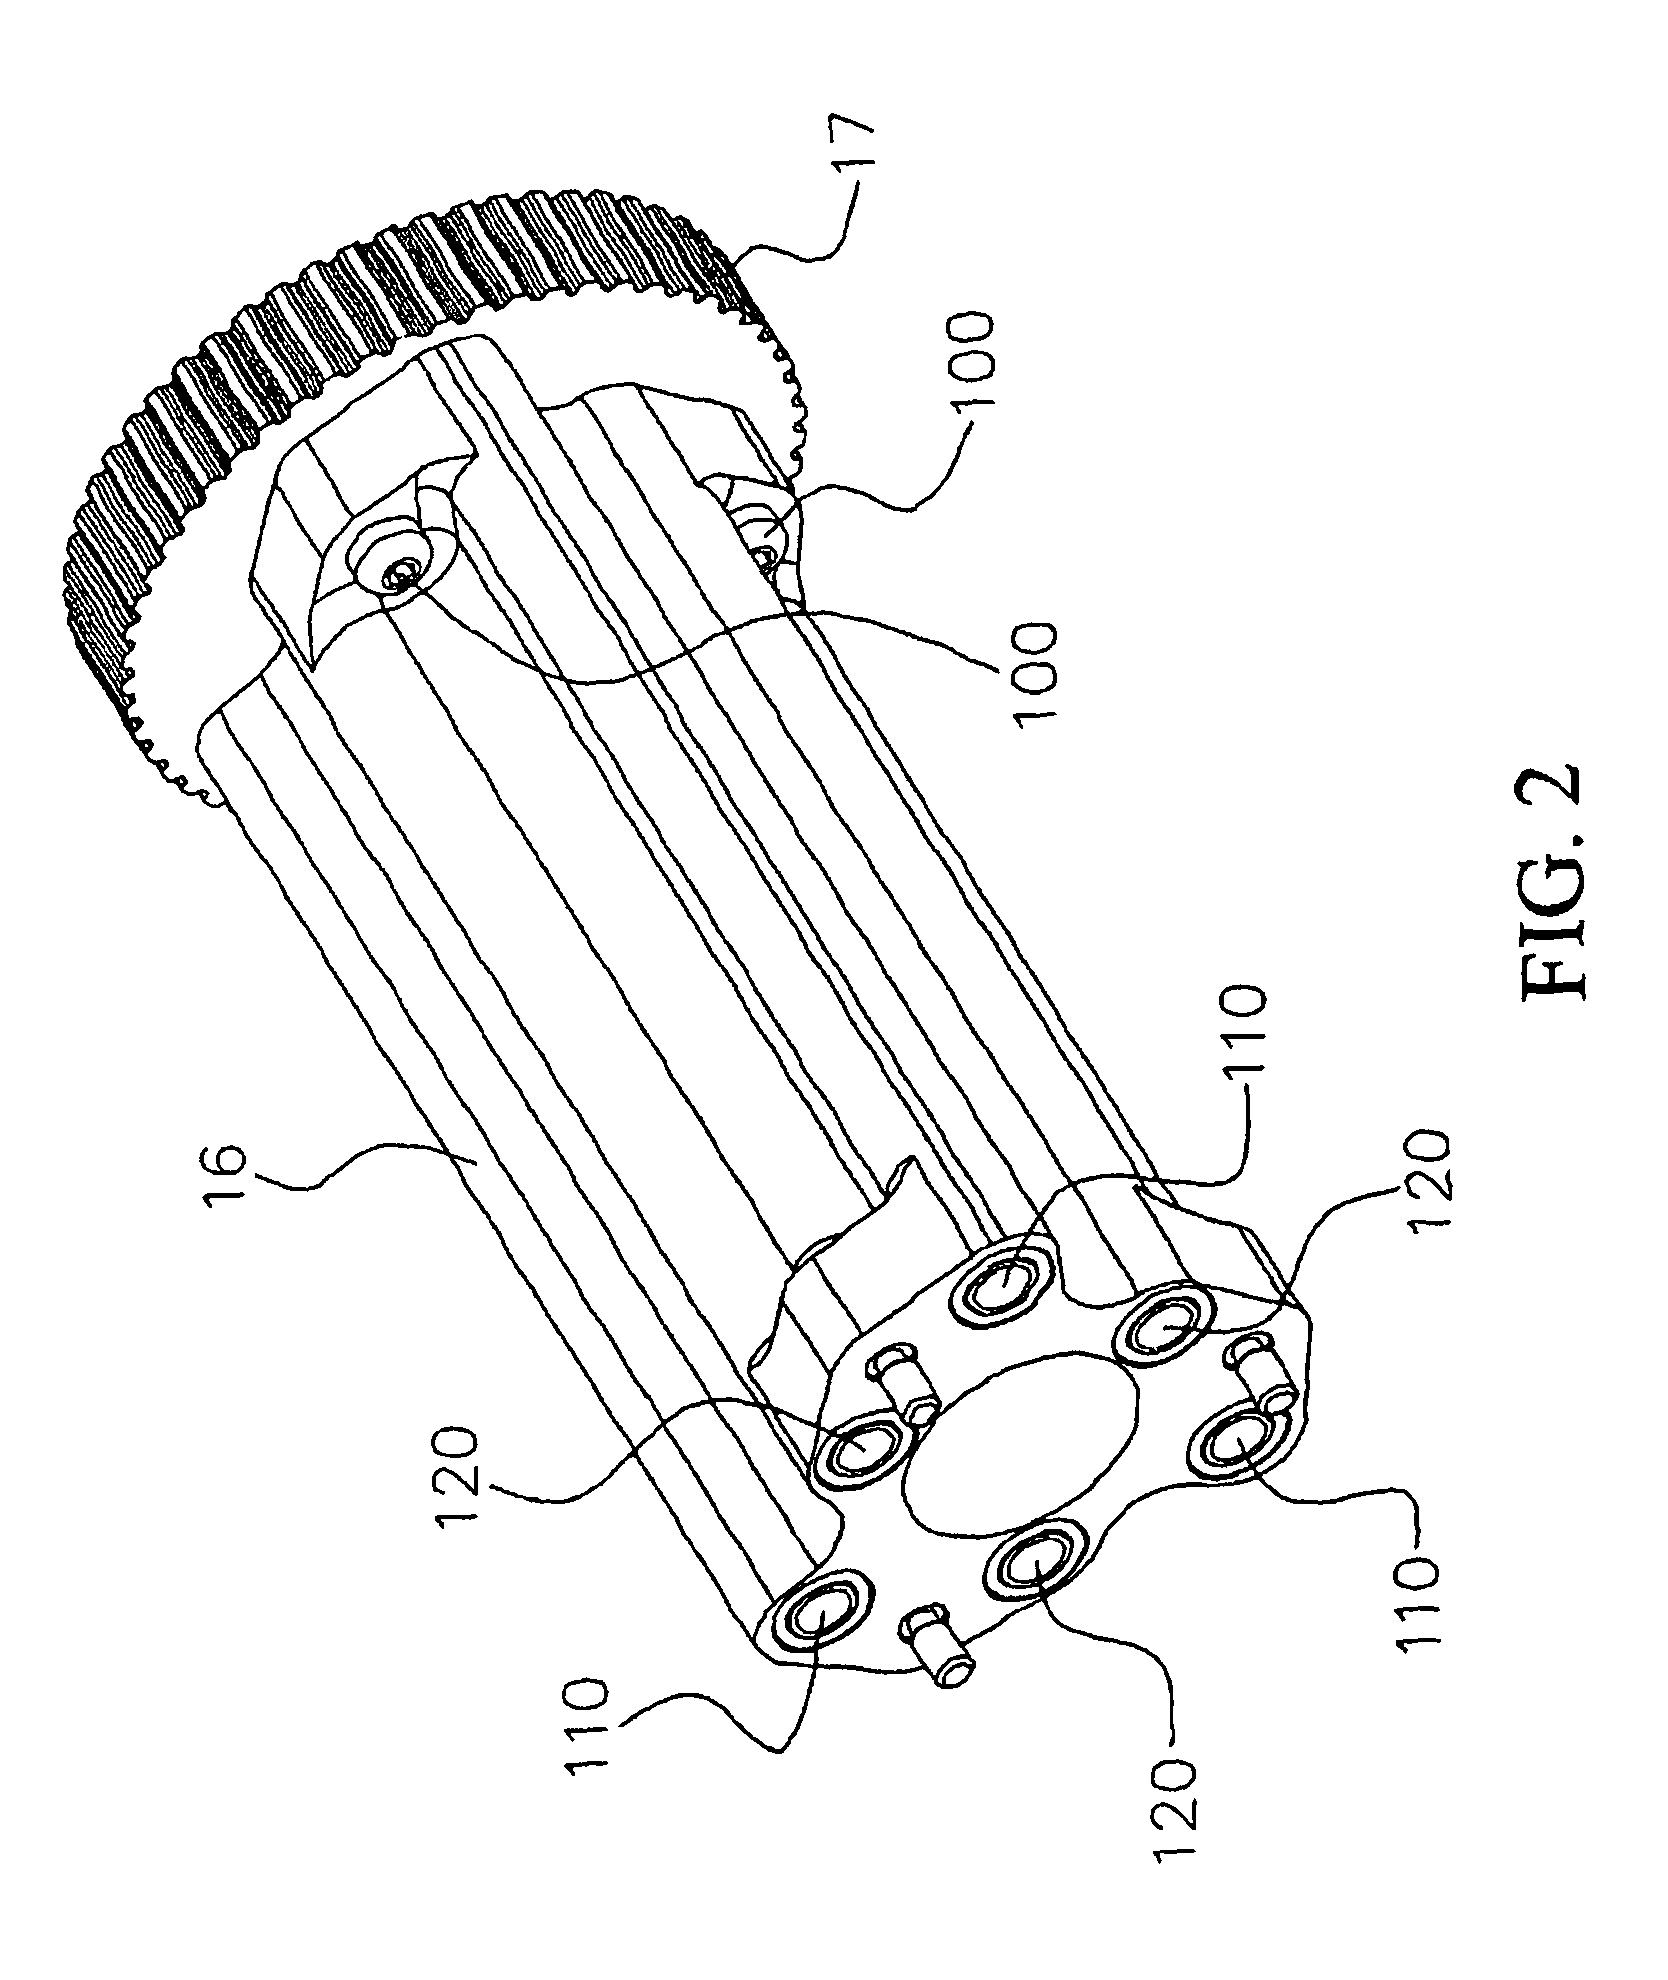 Package pick-off and delivery device